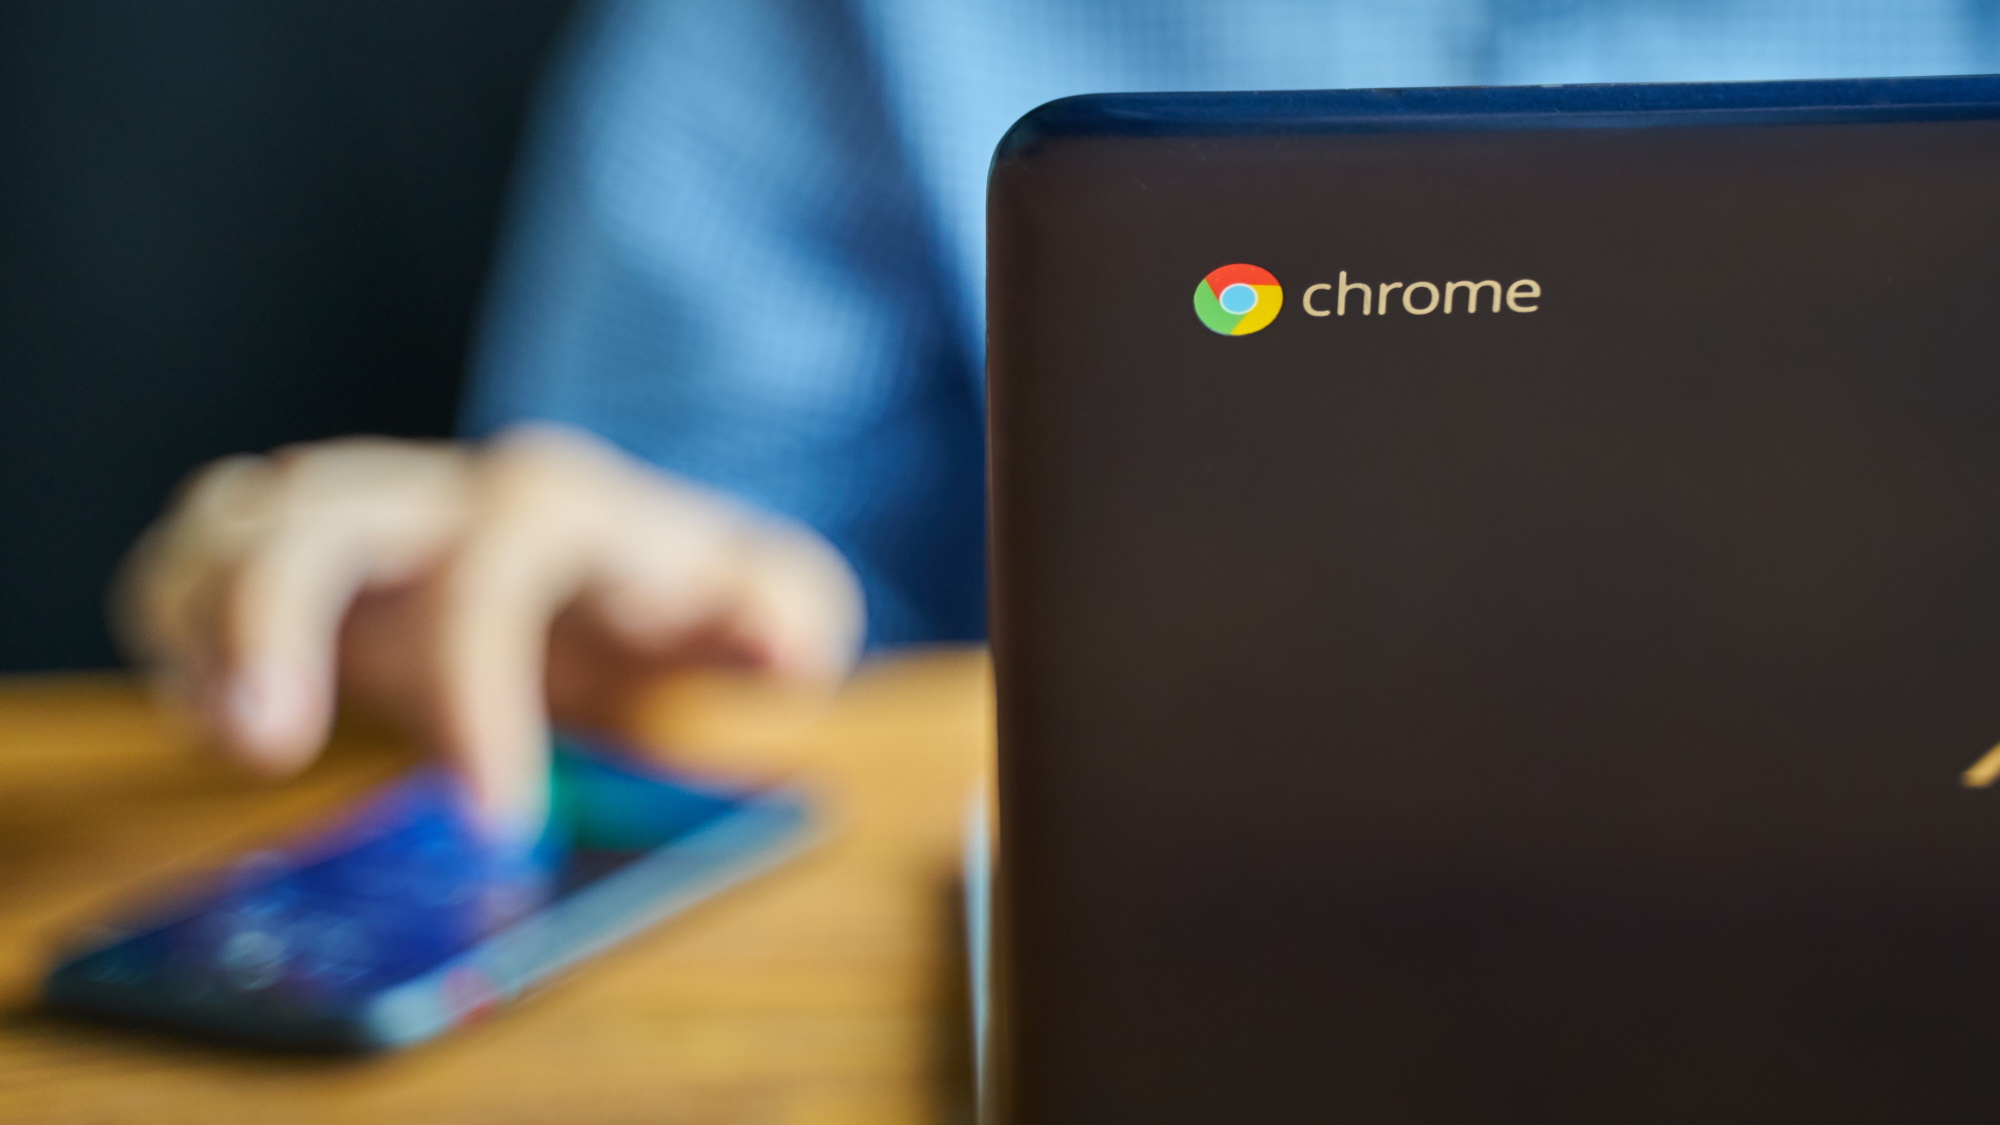 Chrome logo on the back of a Chromebook with a blurred man working on it